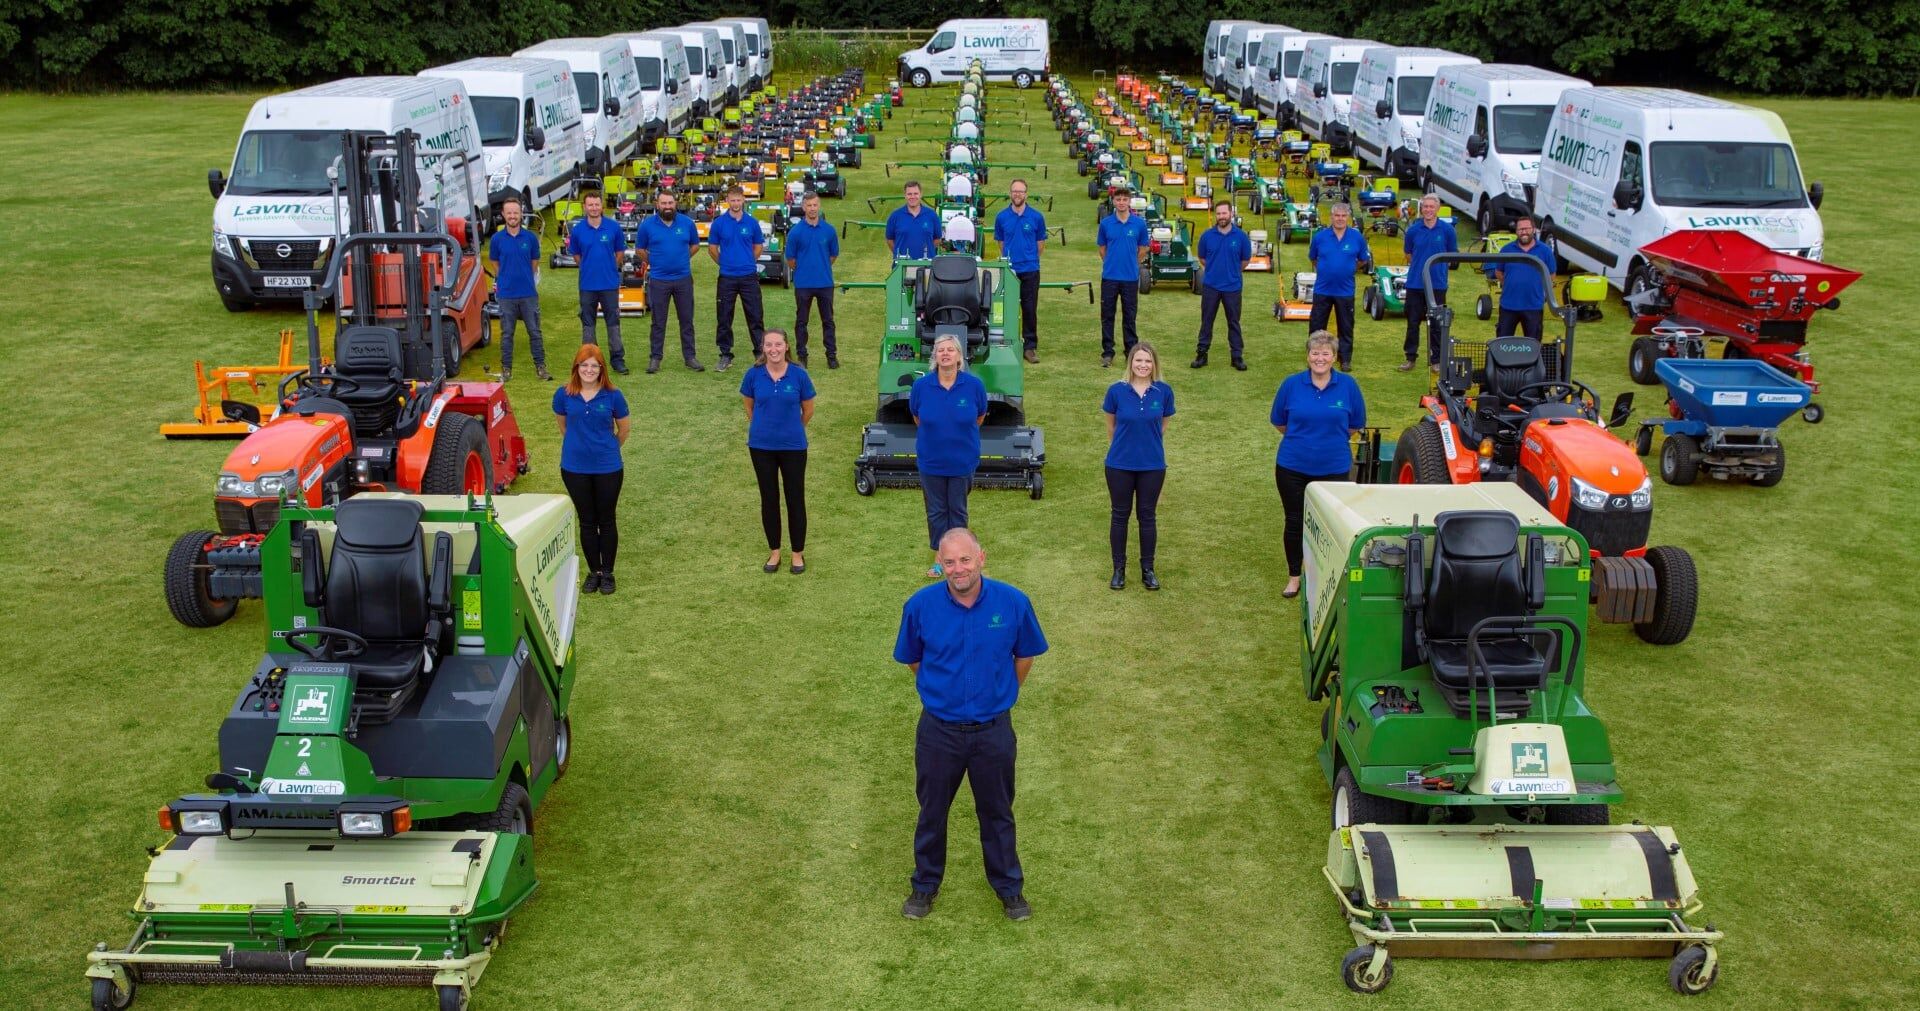 The Lawntech Lawn Care Team